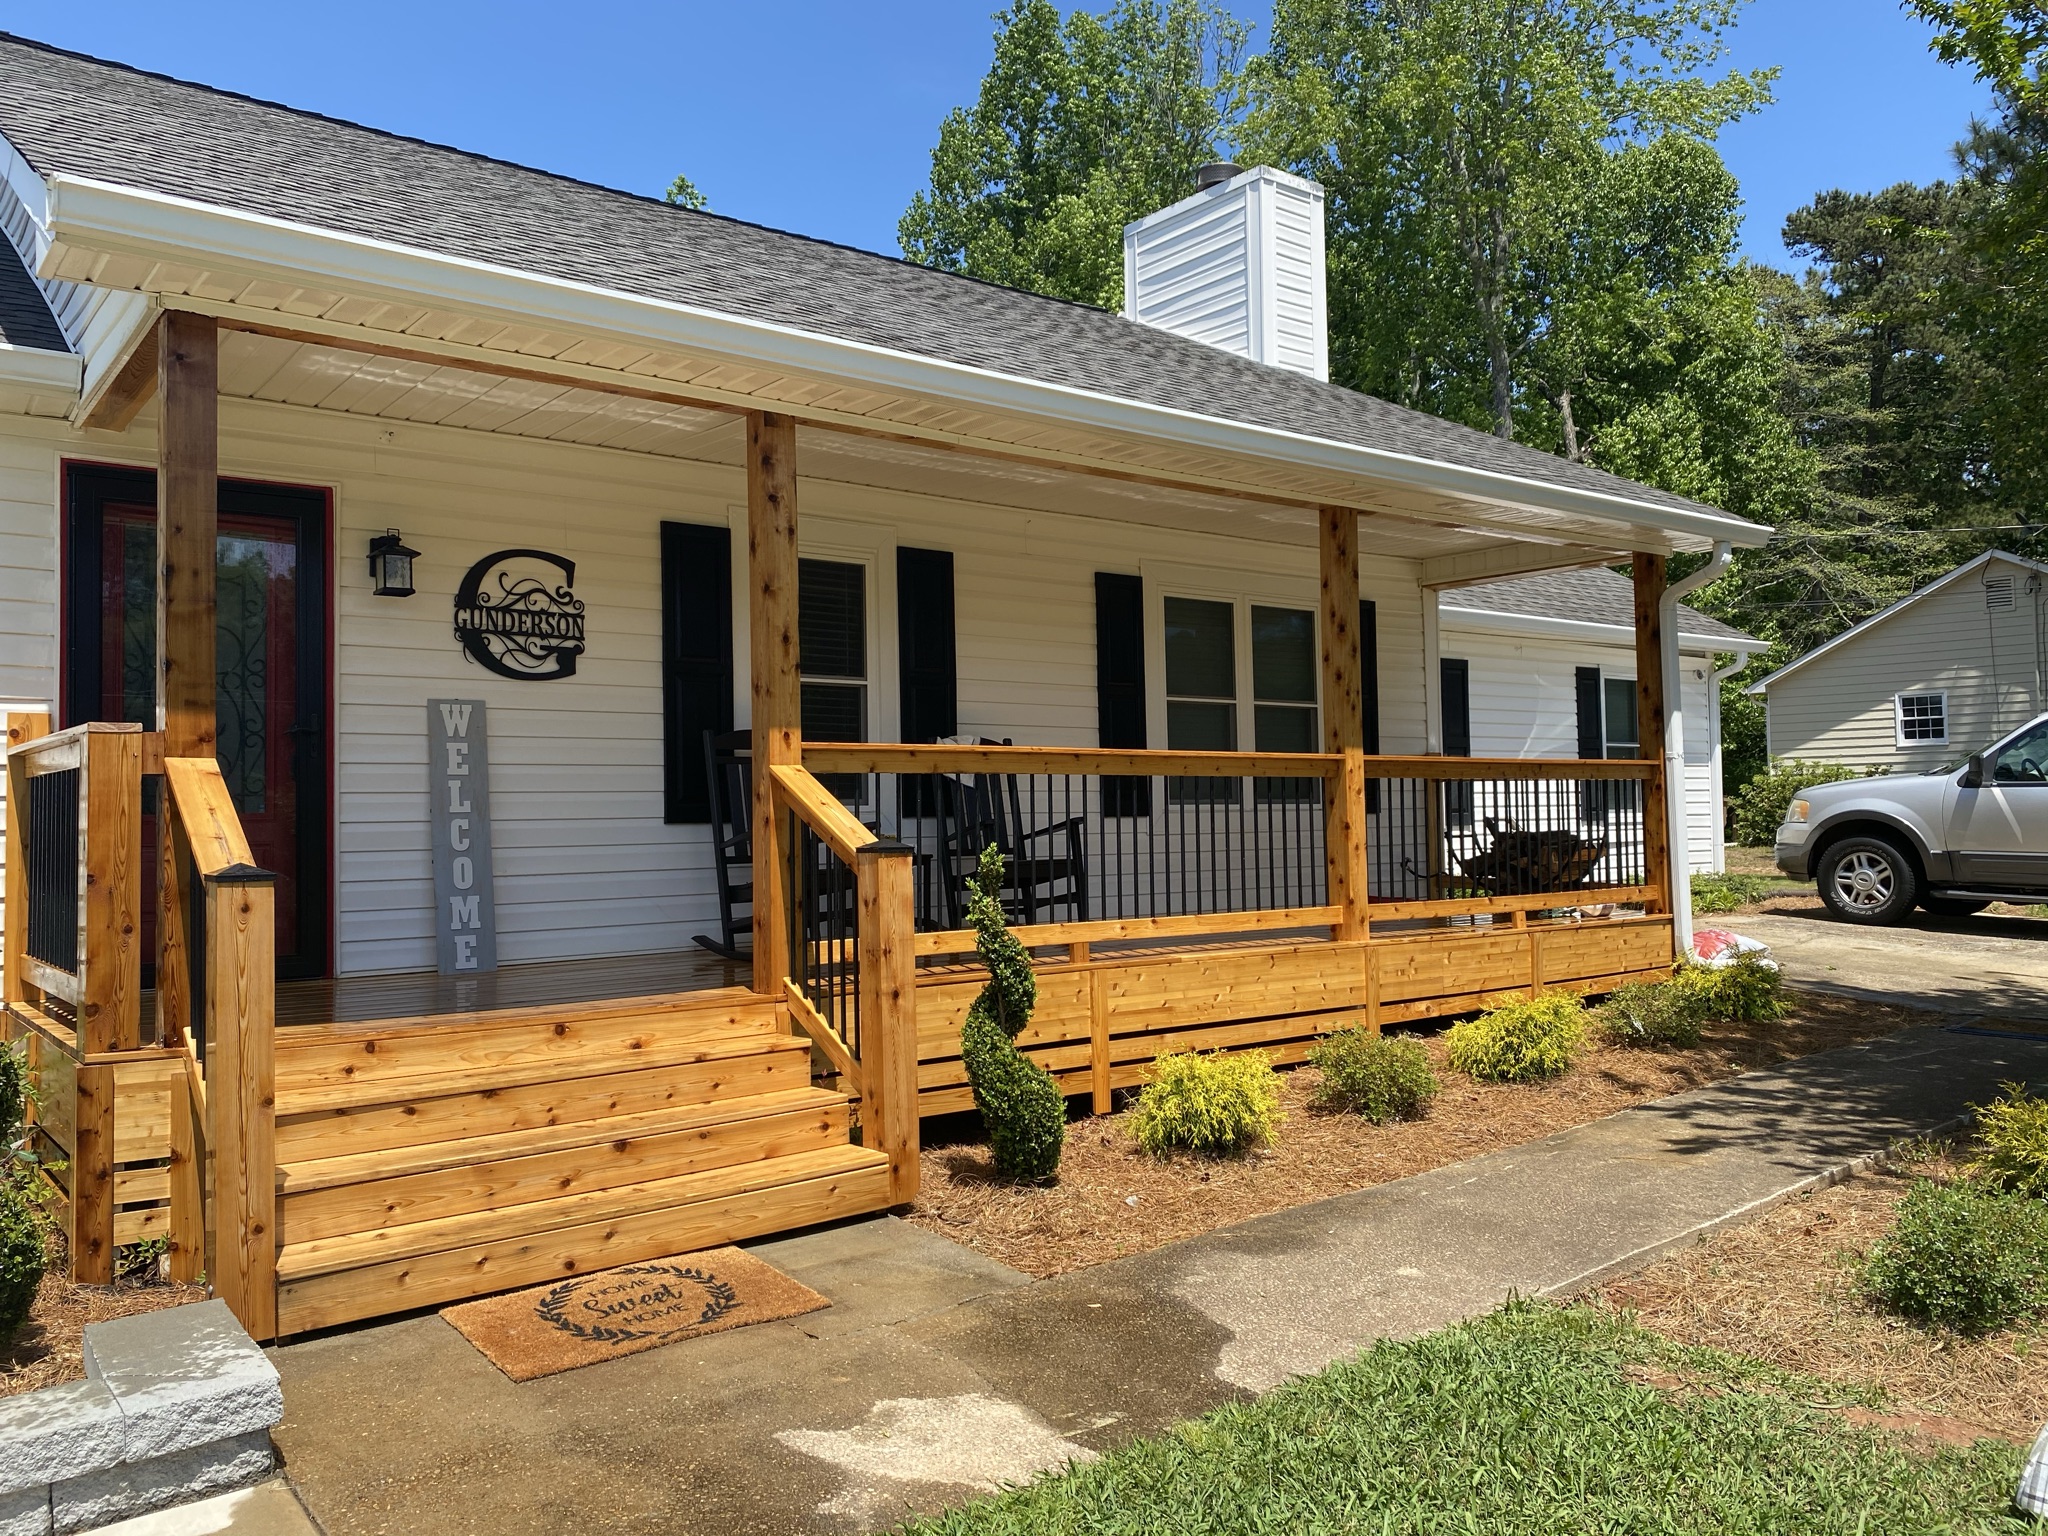 Old Home. New Look. Stockbridge Homeowner Gives a Facelift to Their Front Porch.